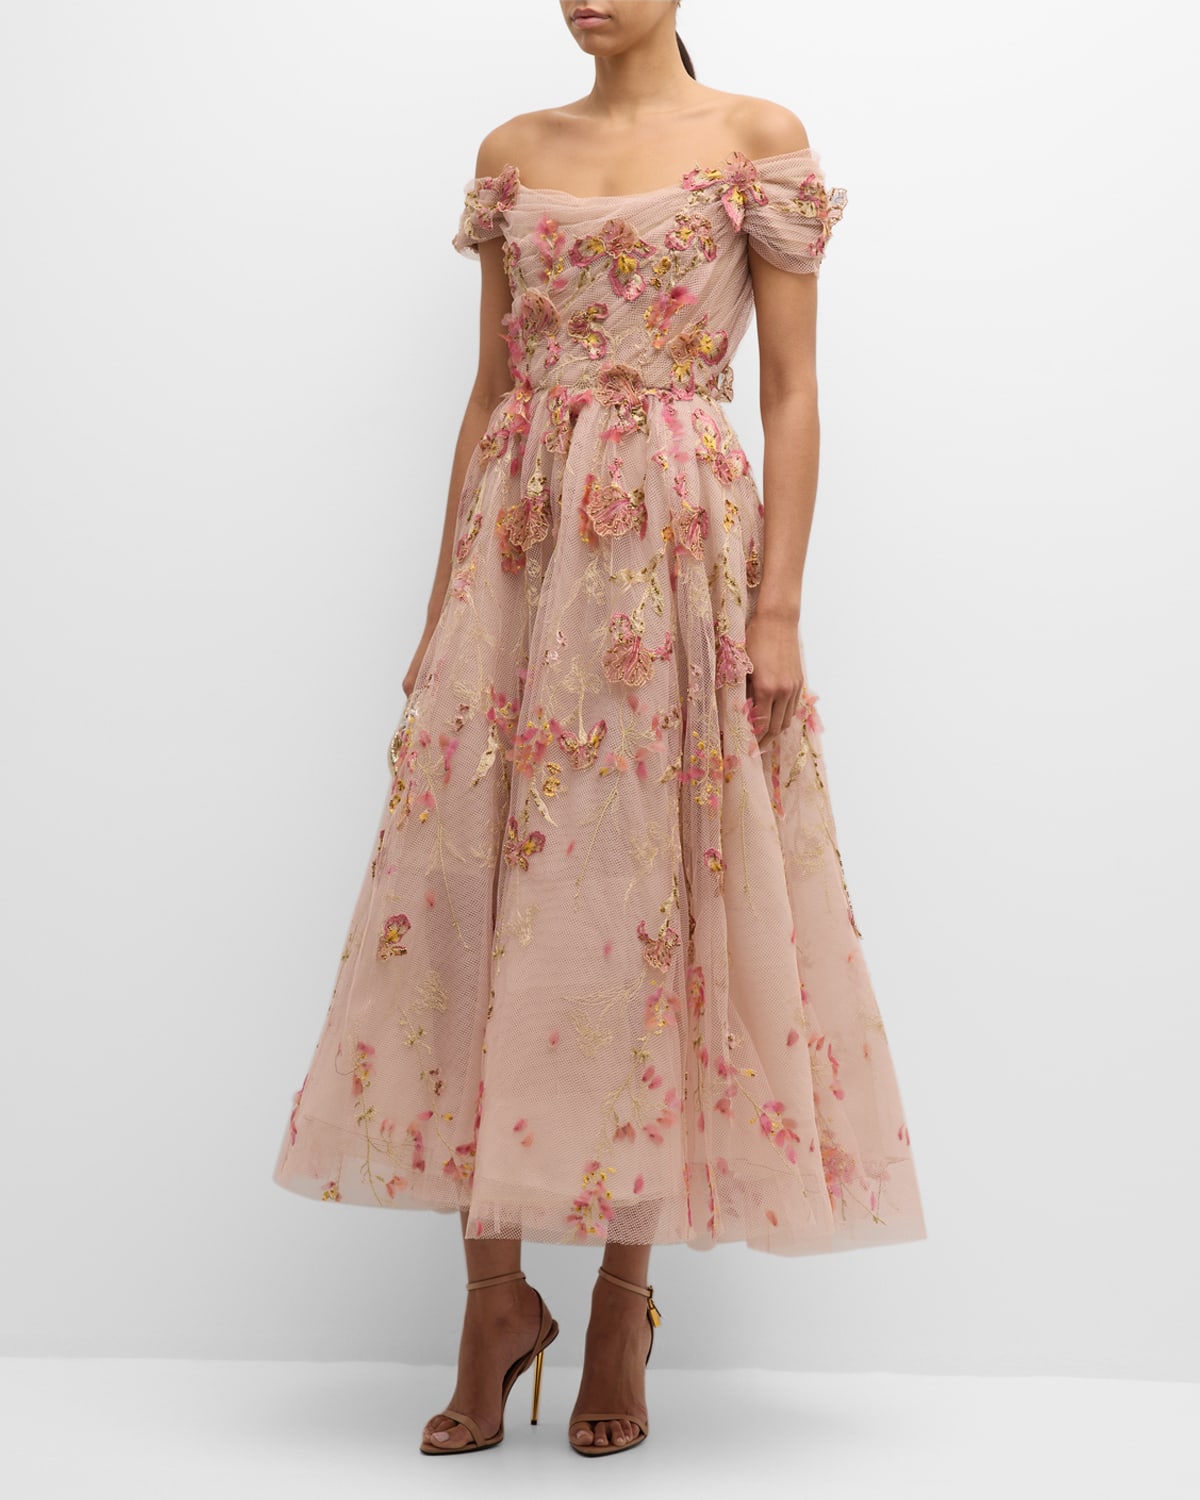 MARCHESA MULTICOLOR FLORAL EMBROIDERED COCKTAIL DRESS WITH 3D FLOWER ACCENTS